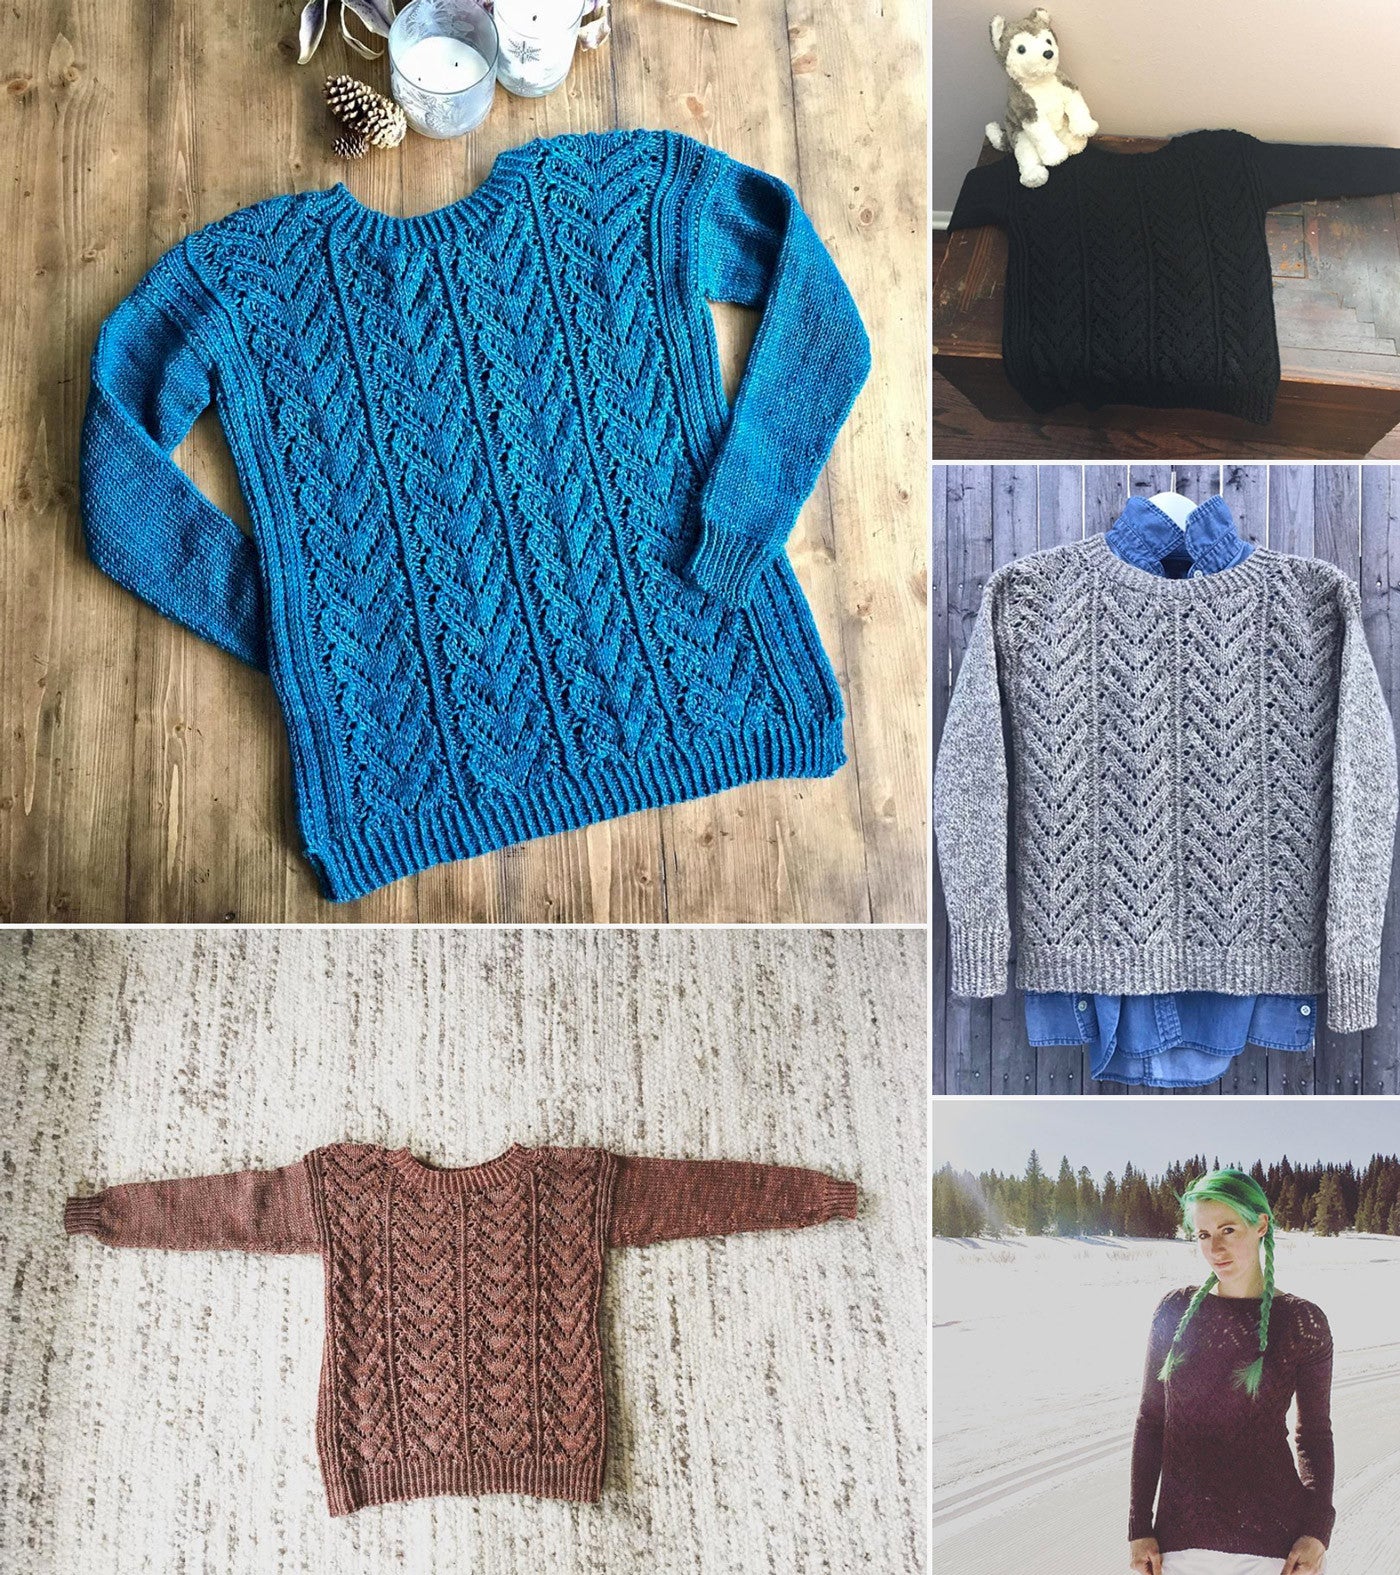 Best Finished Sweater Photo Runner-Ups